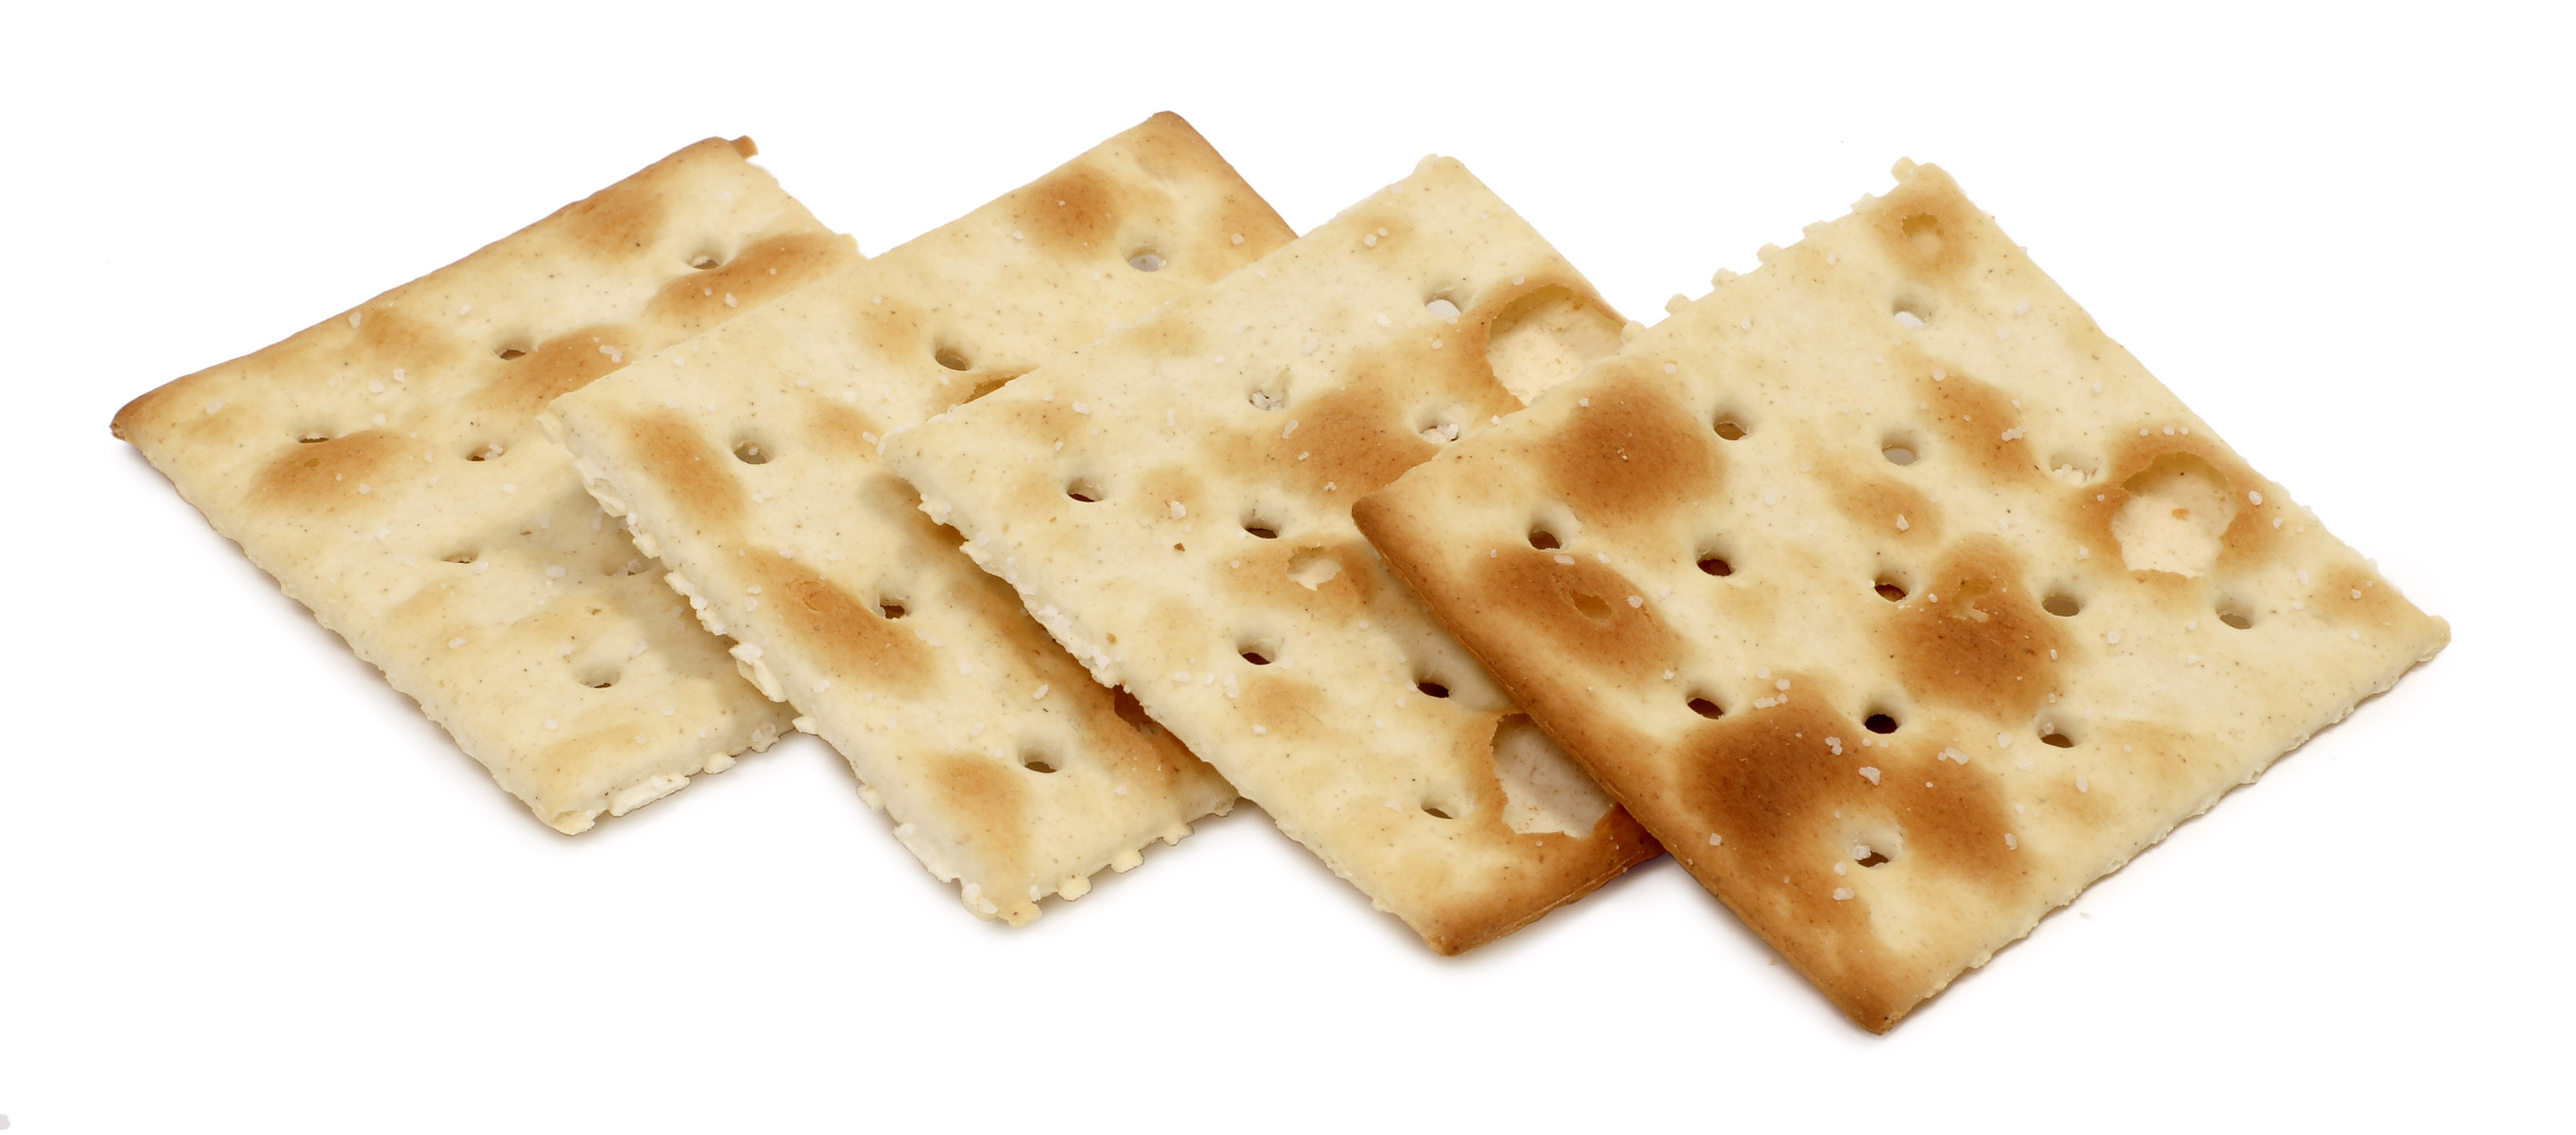 Can Soda Crackers Cause Gas